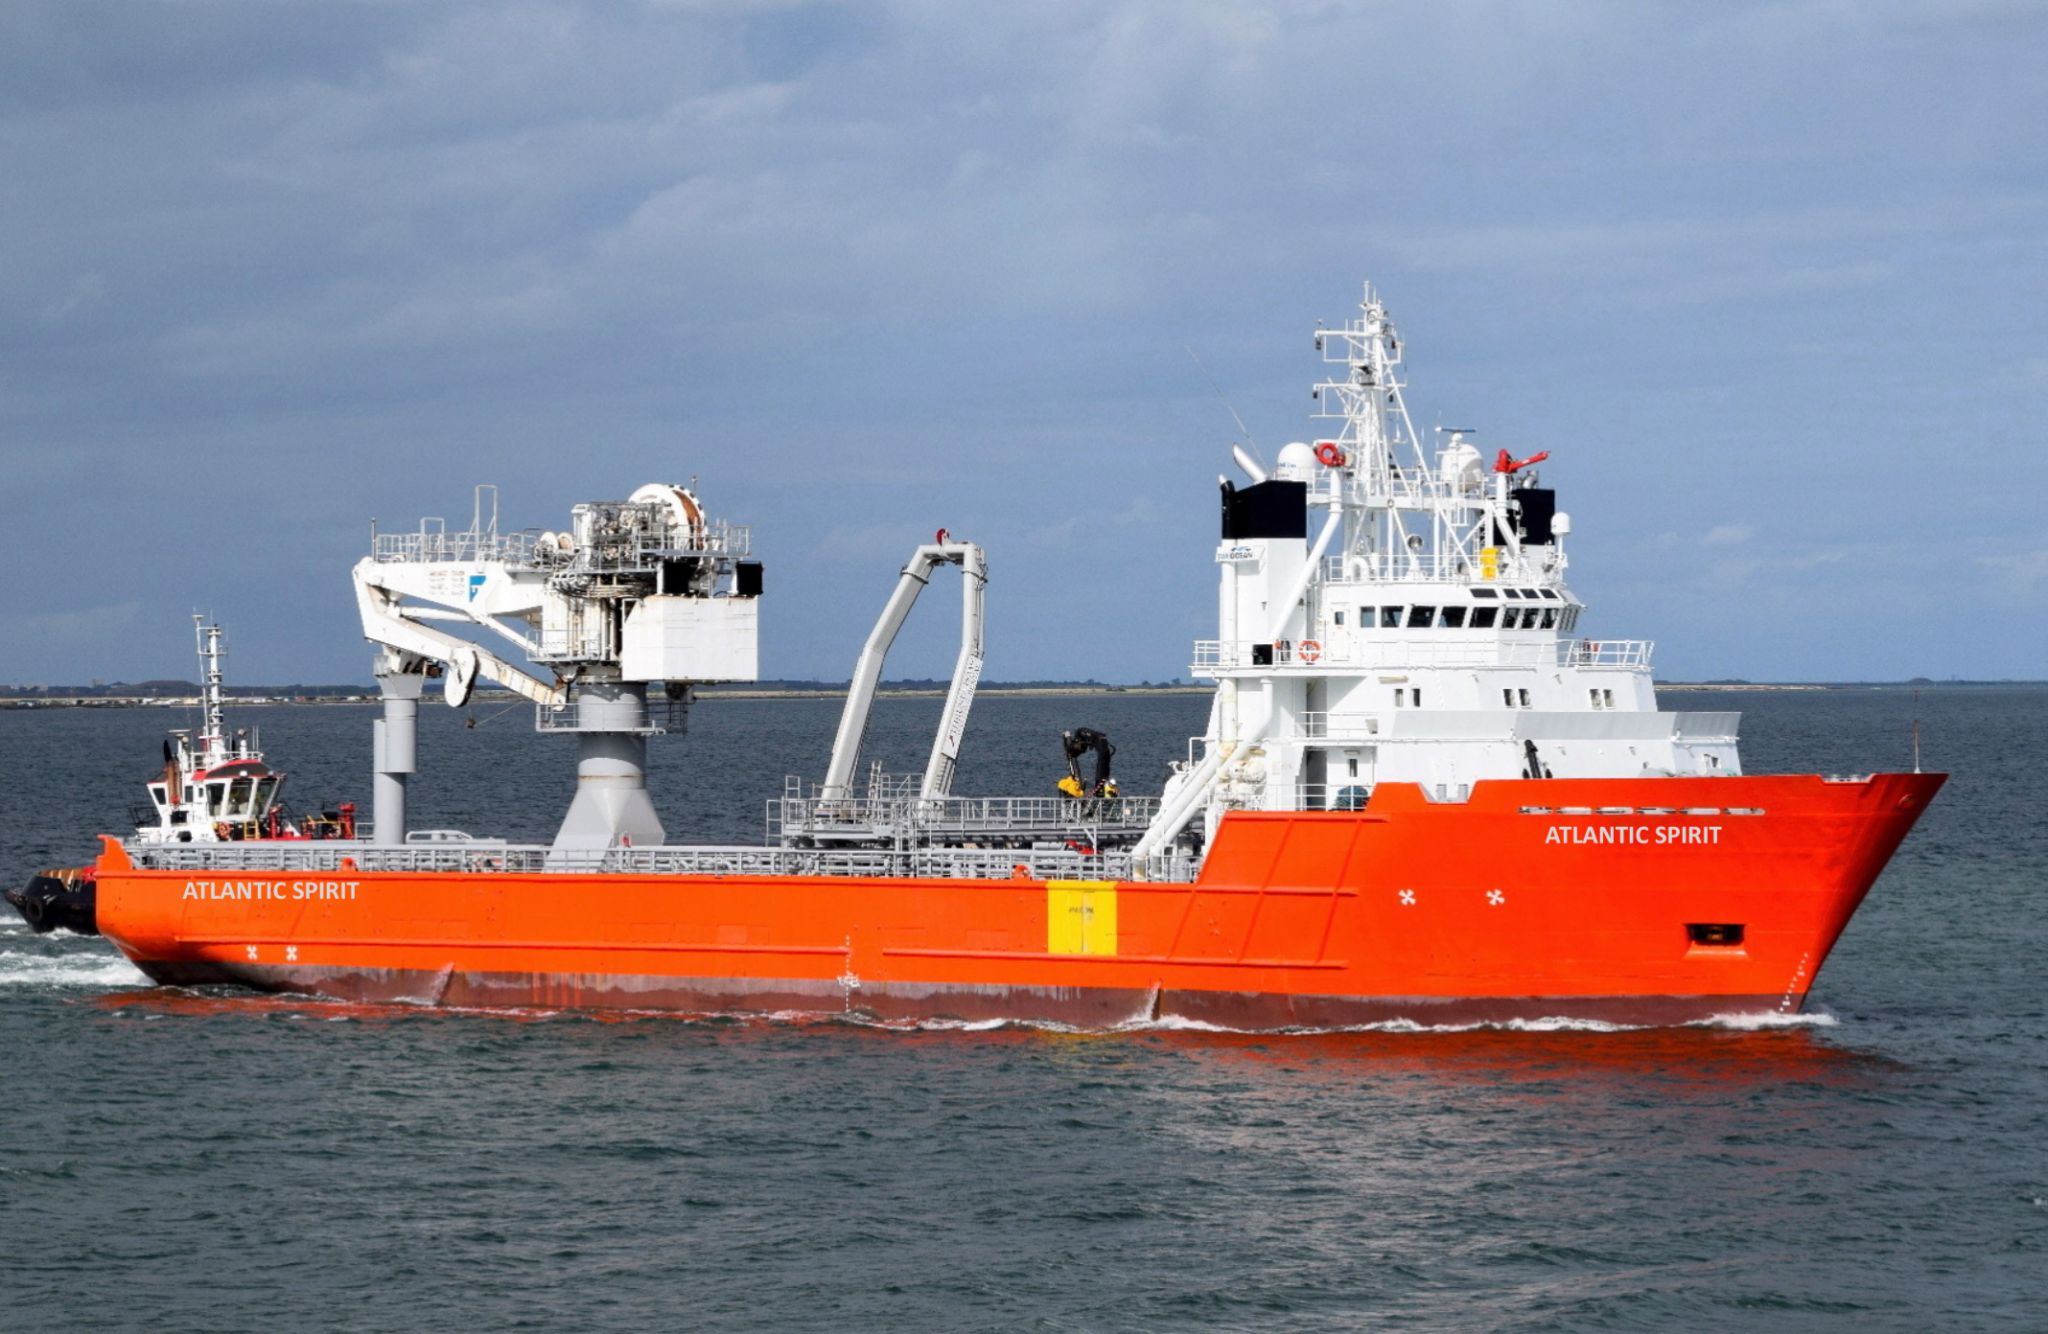 Atlantic Oceanic Buys MPSV as Part of Its Ongoing Fleet Growth Program